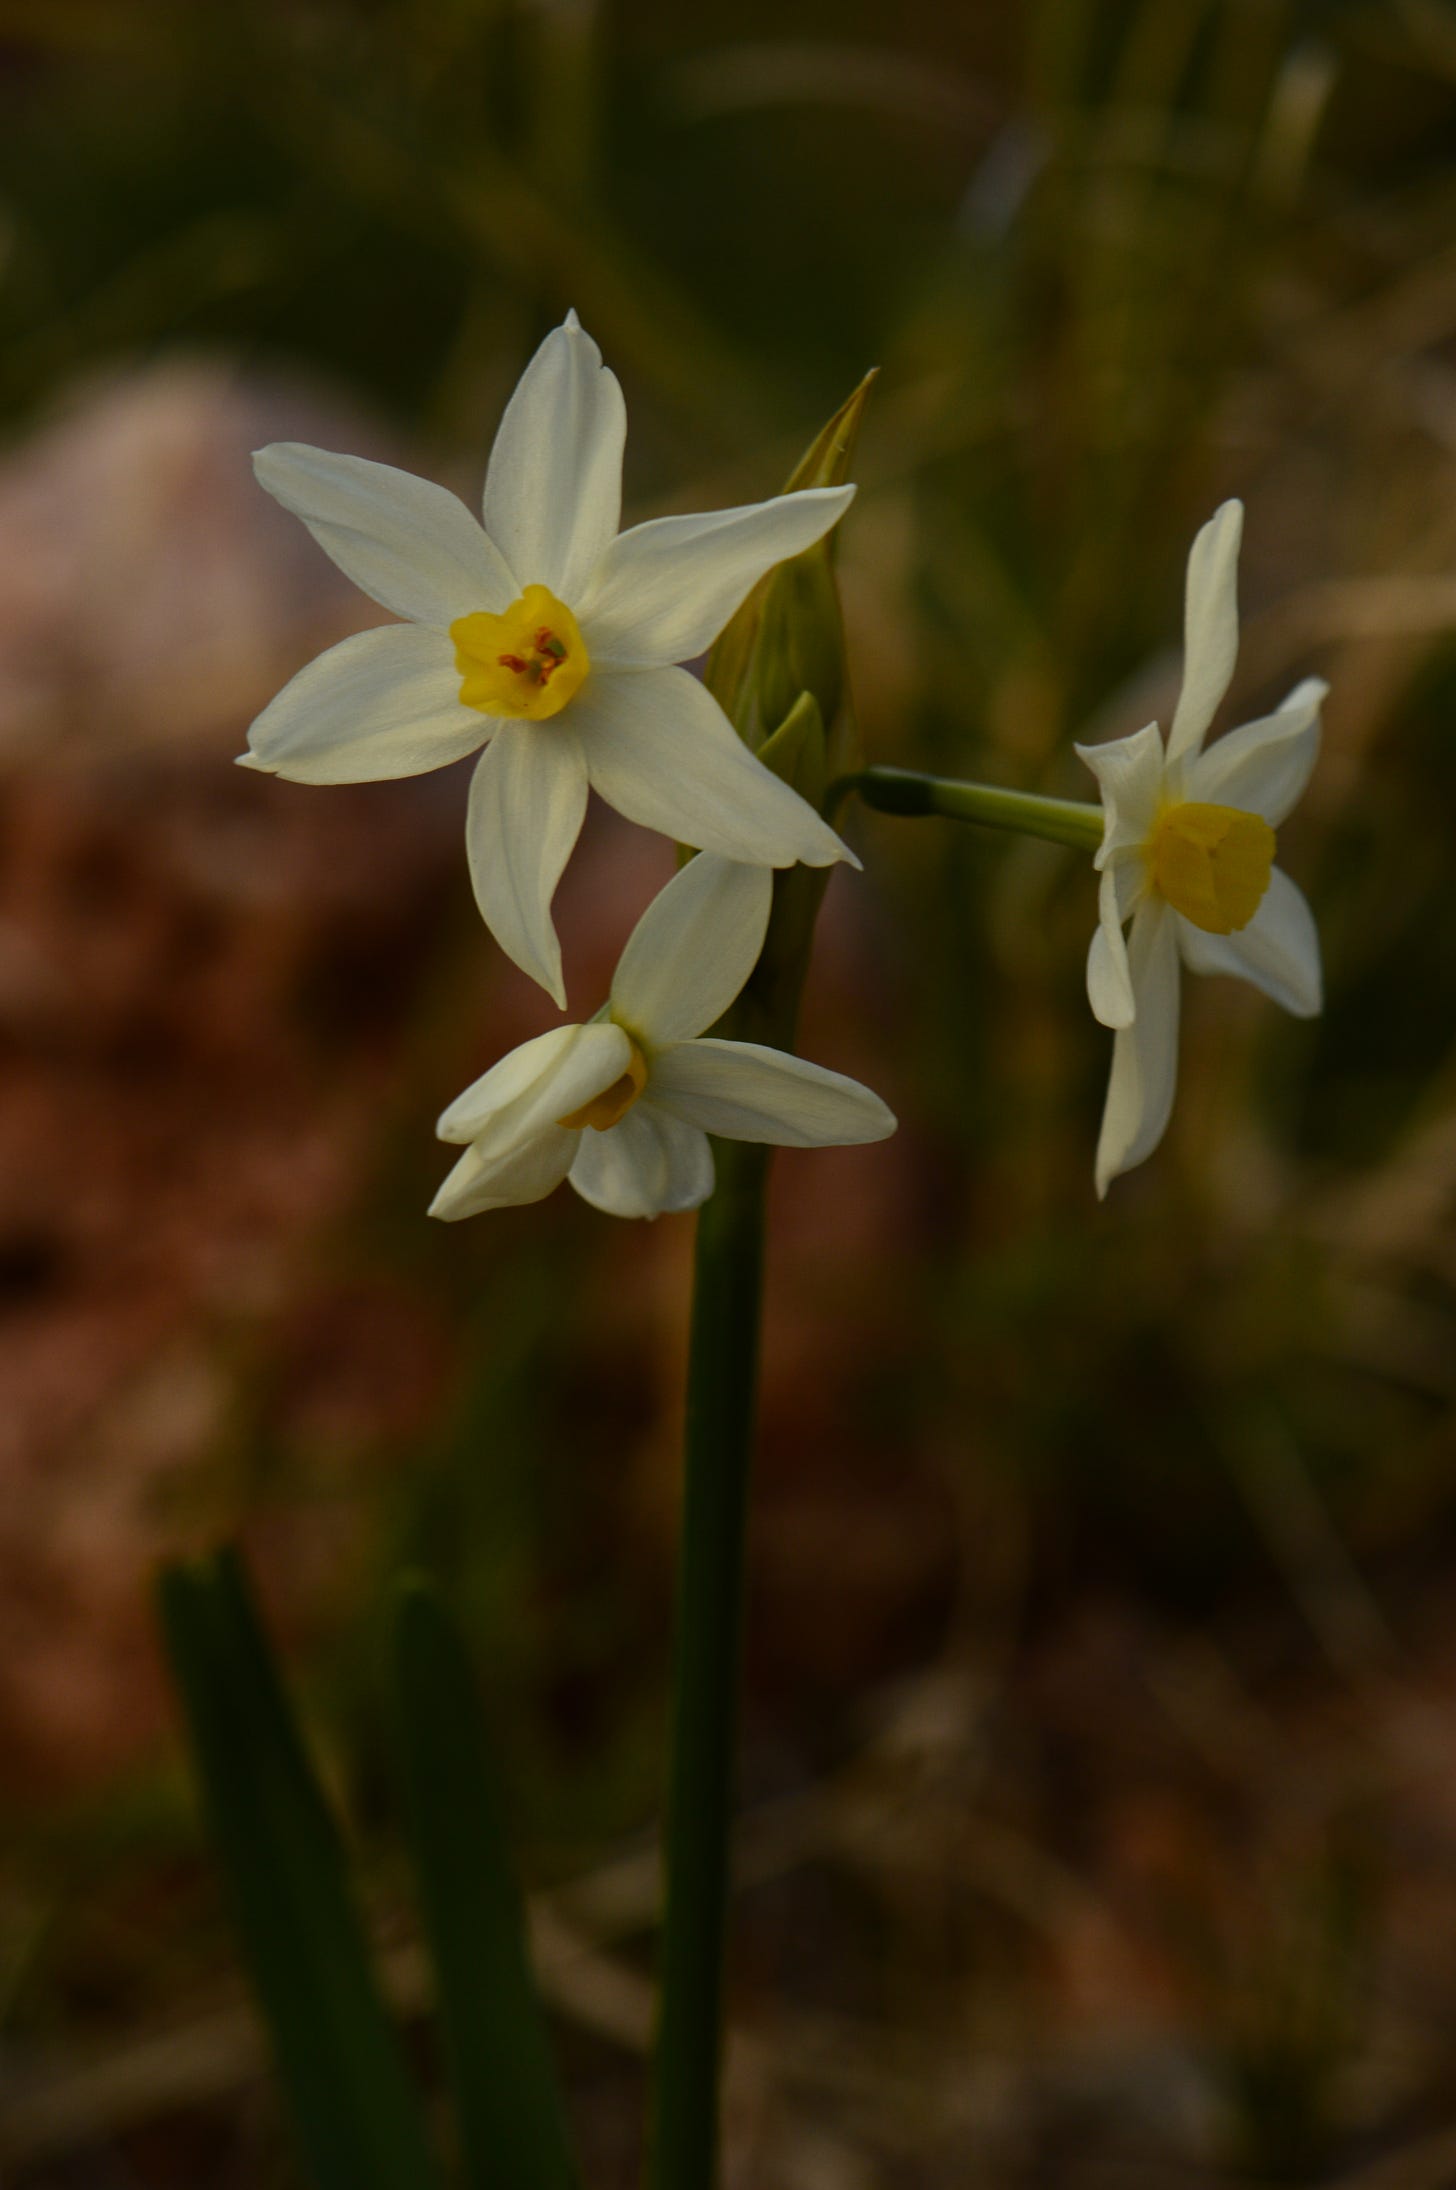 narcissus blooms with starry white petals and a small yellow cup. A handful of small blooms bend outward from a slender stem.